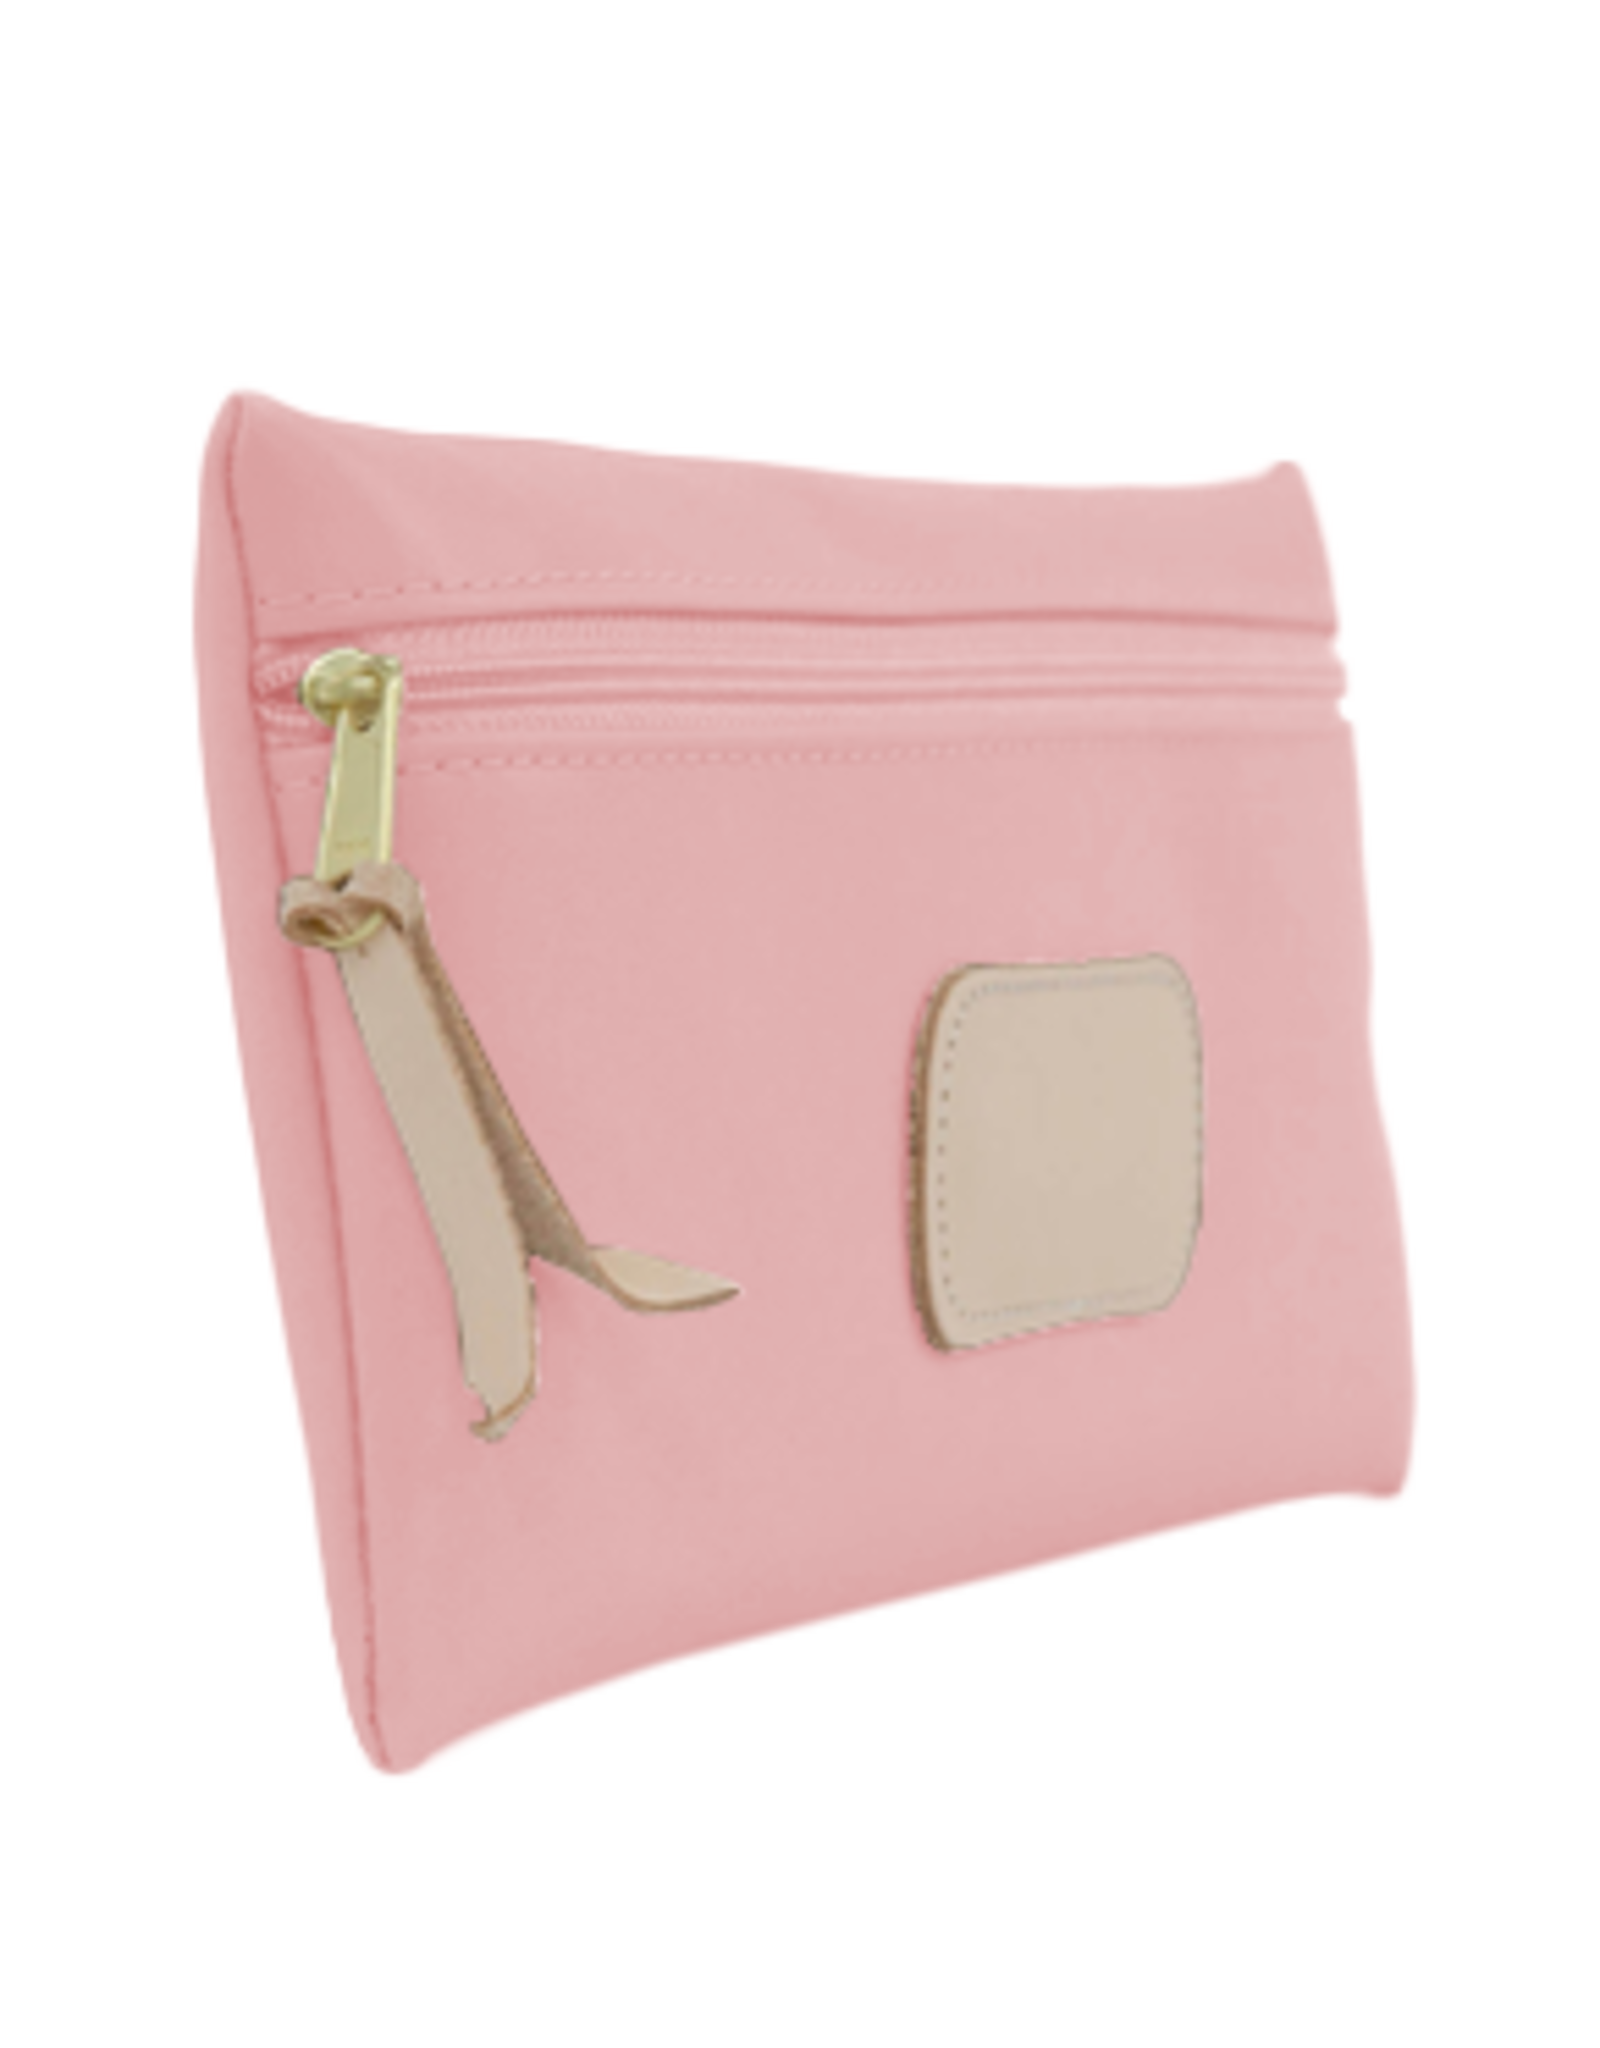 JH #806 Large Pouch- Rose